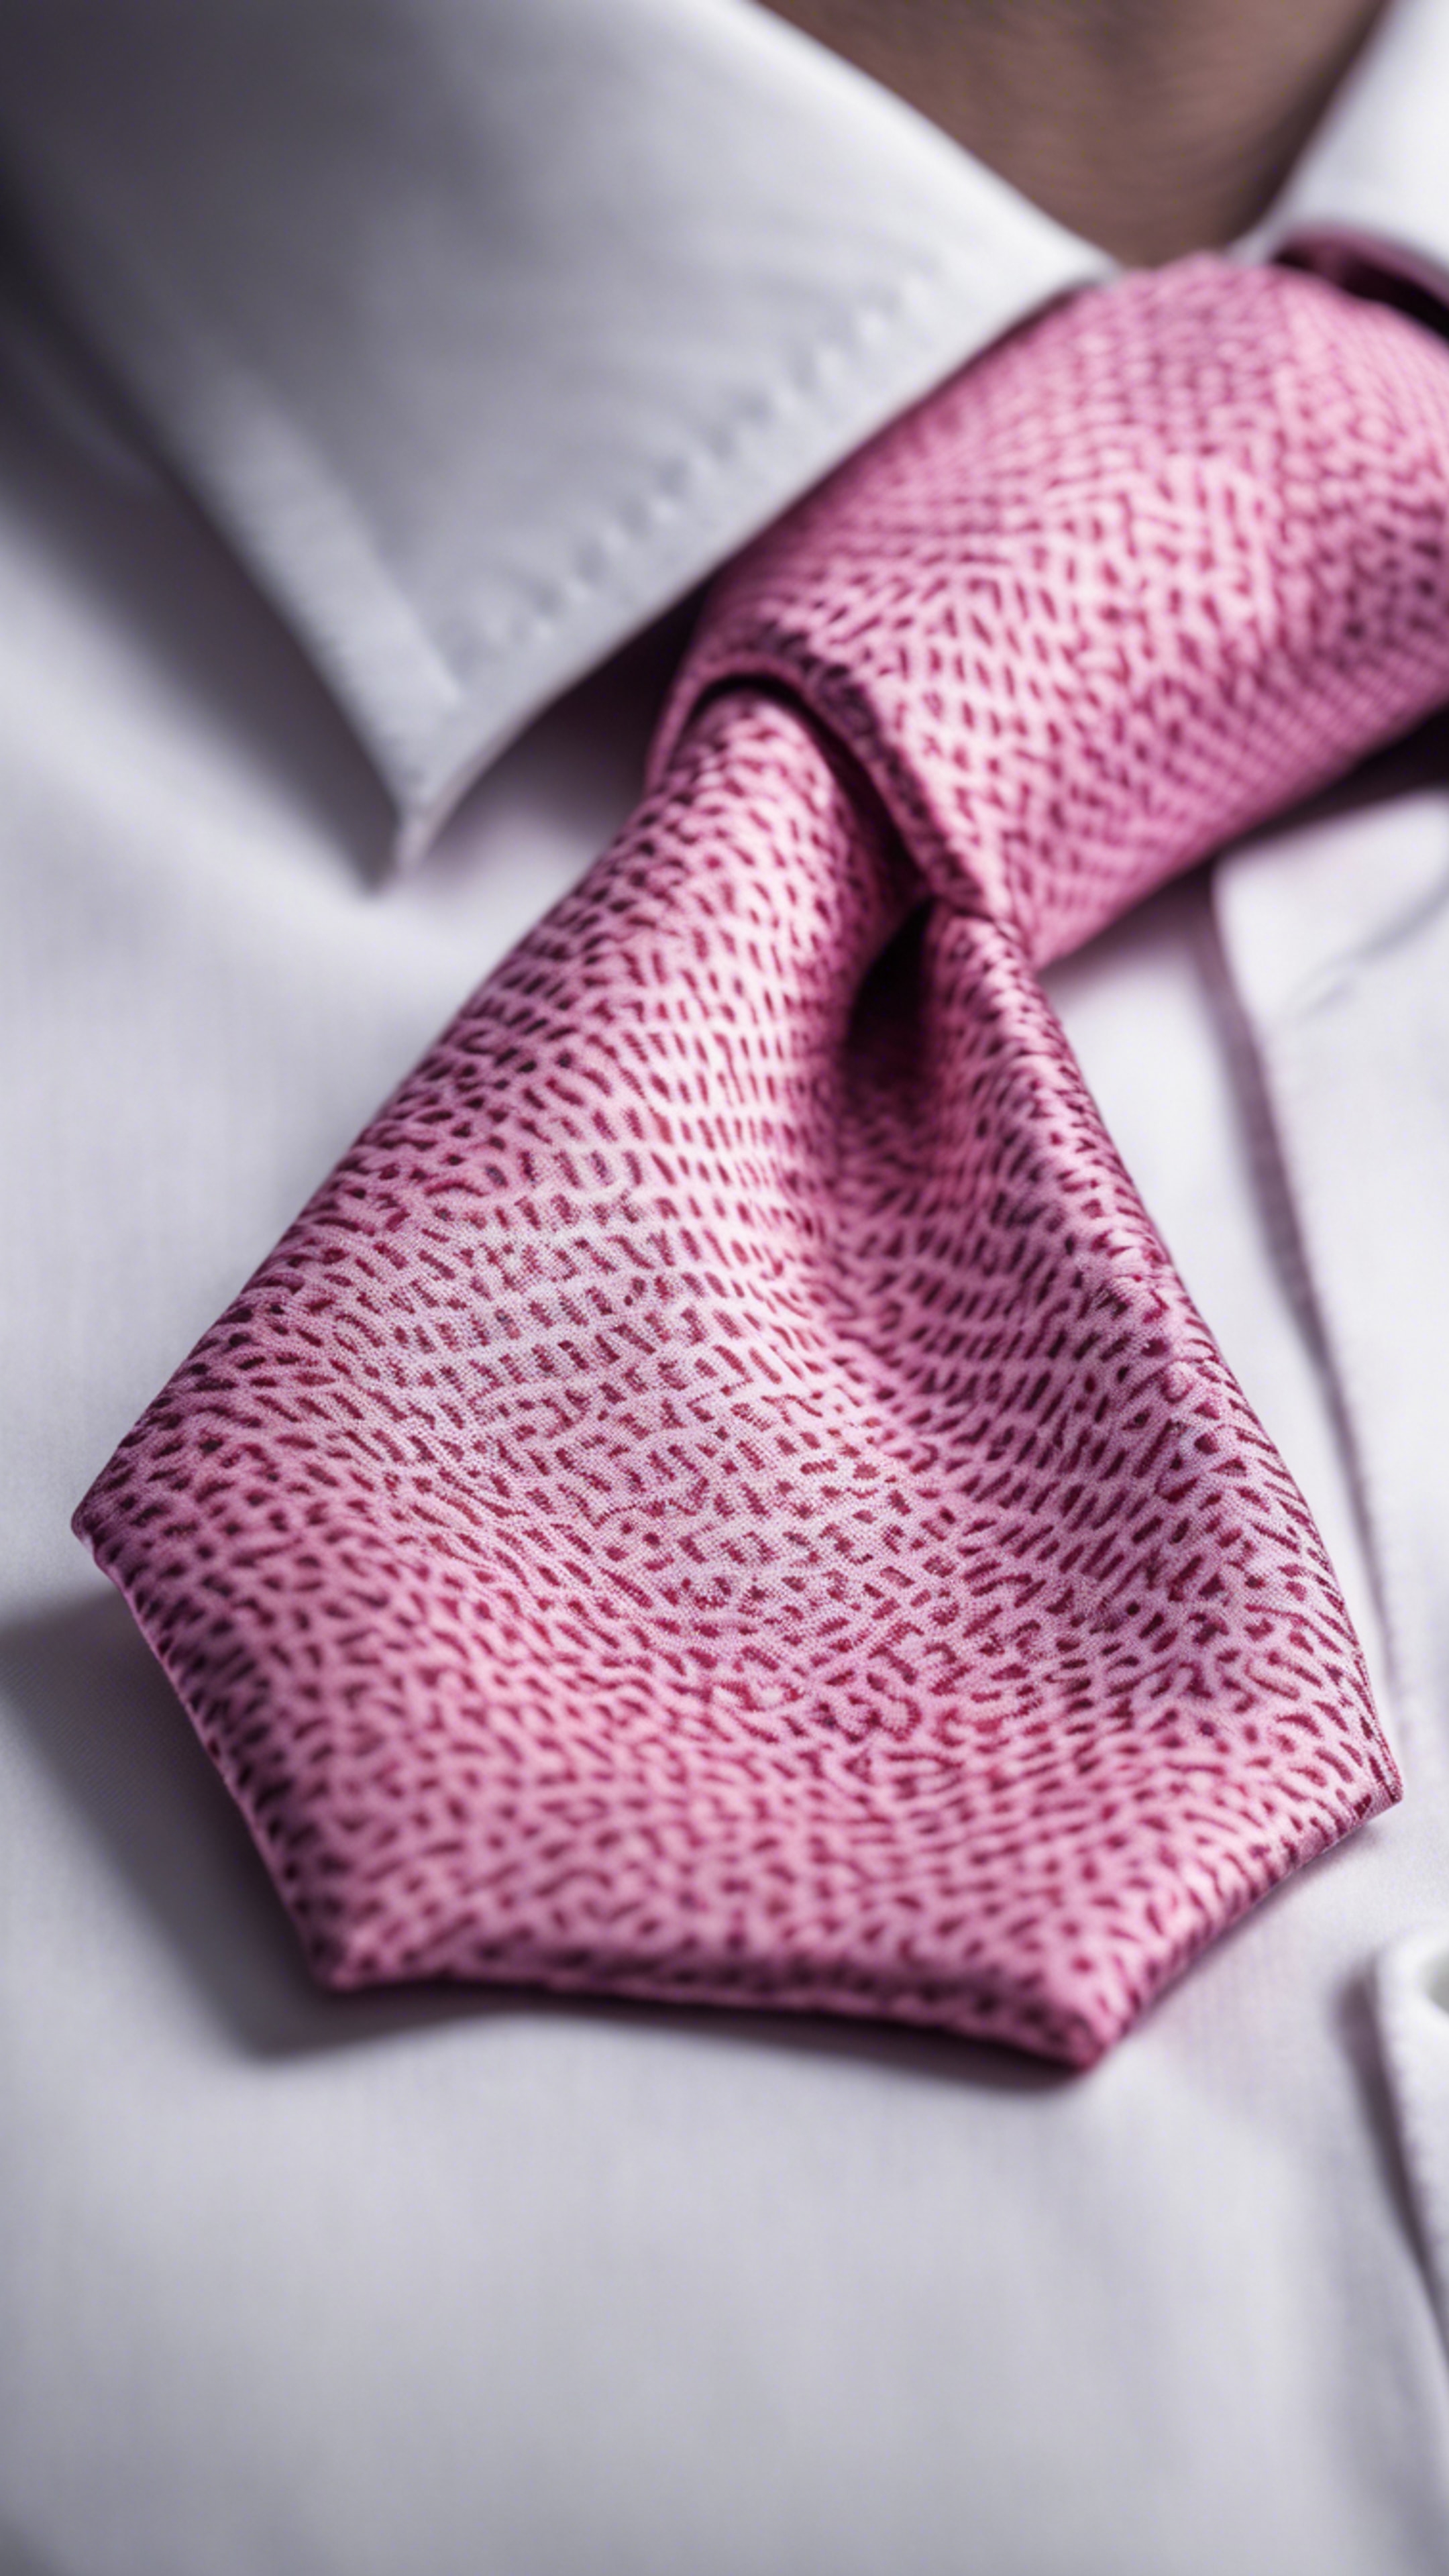 A pink patterned silk tie atop a clean, starched white shirt, representing preppy fashion. Обои[46ce982d17ca4b87a426]